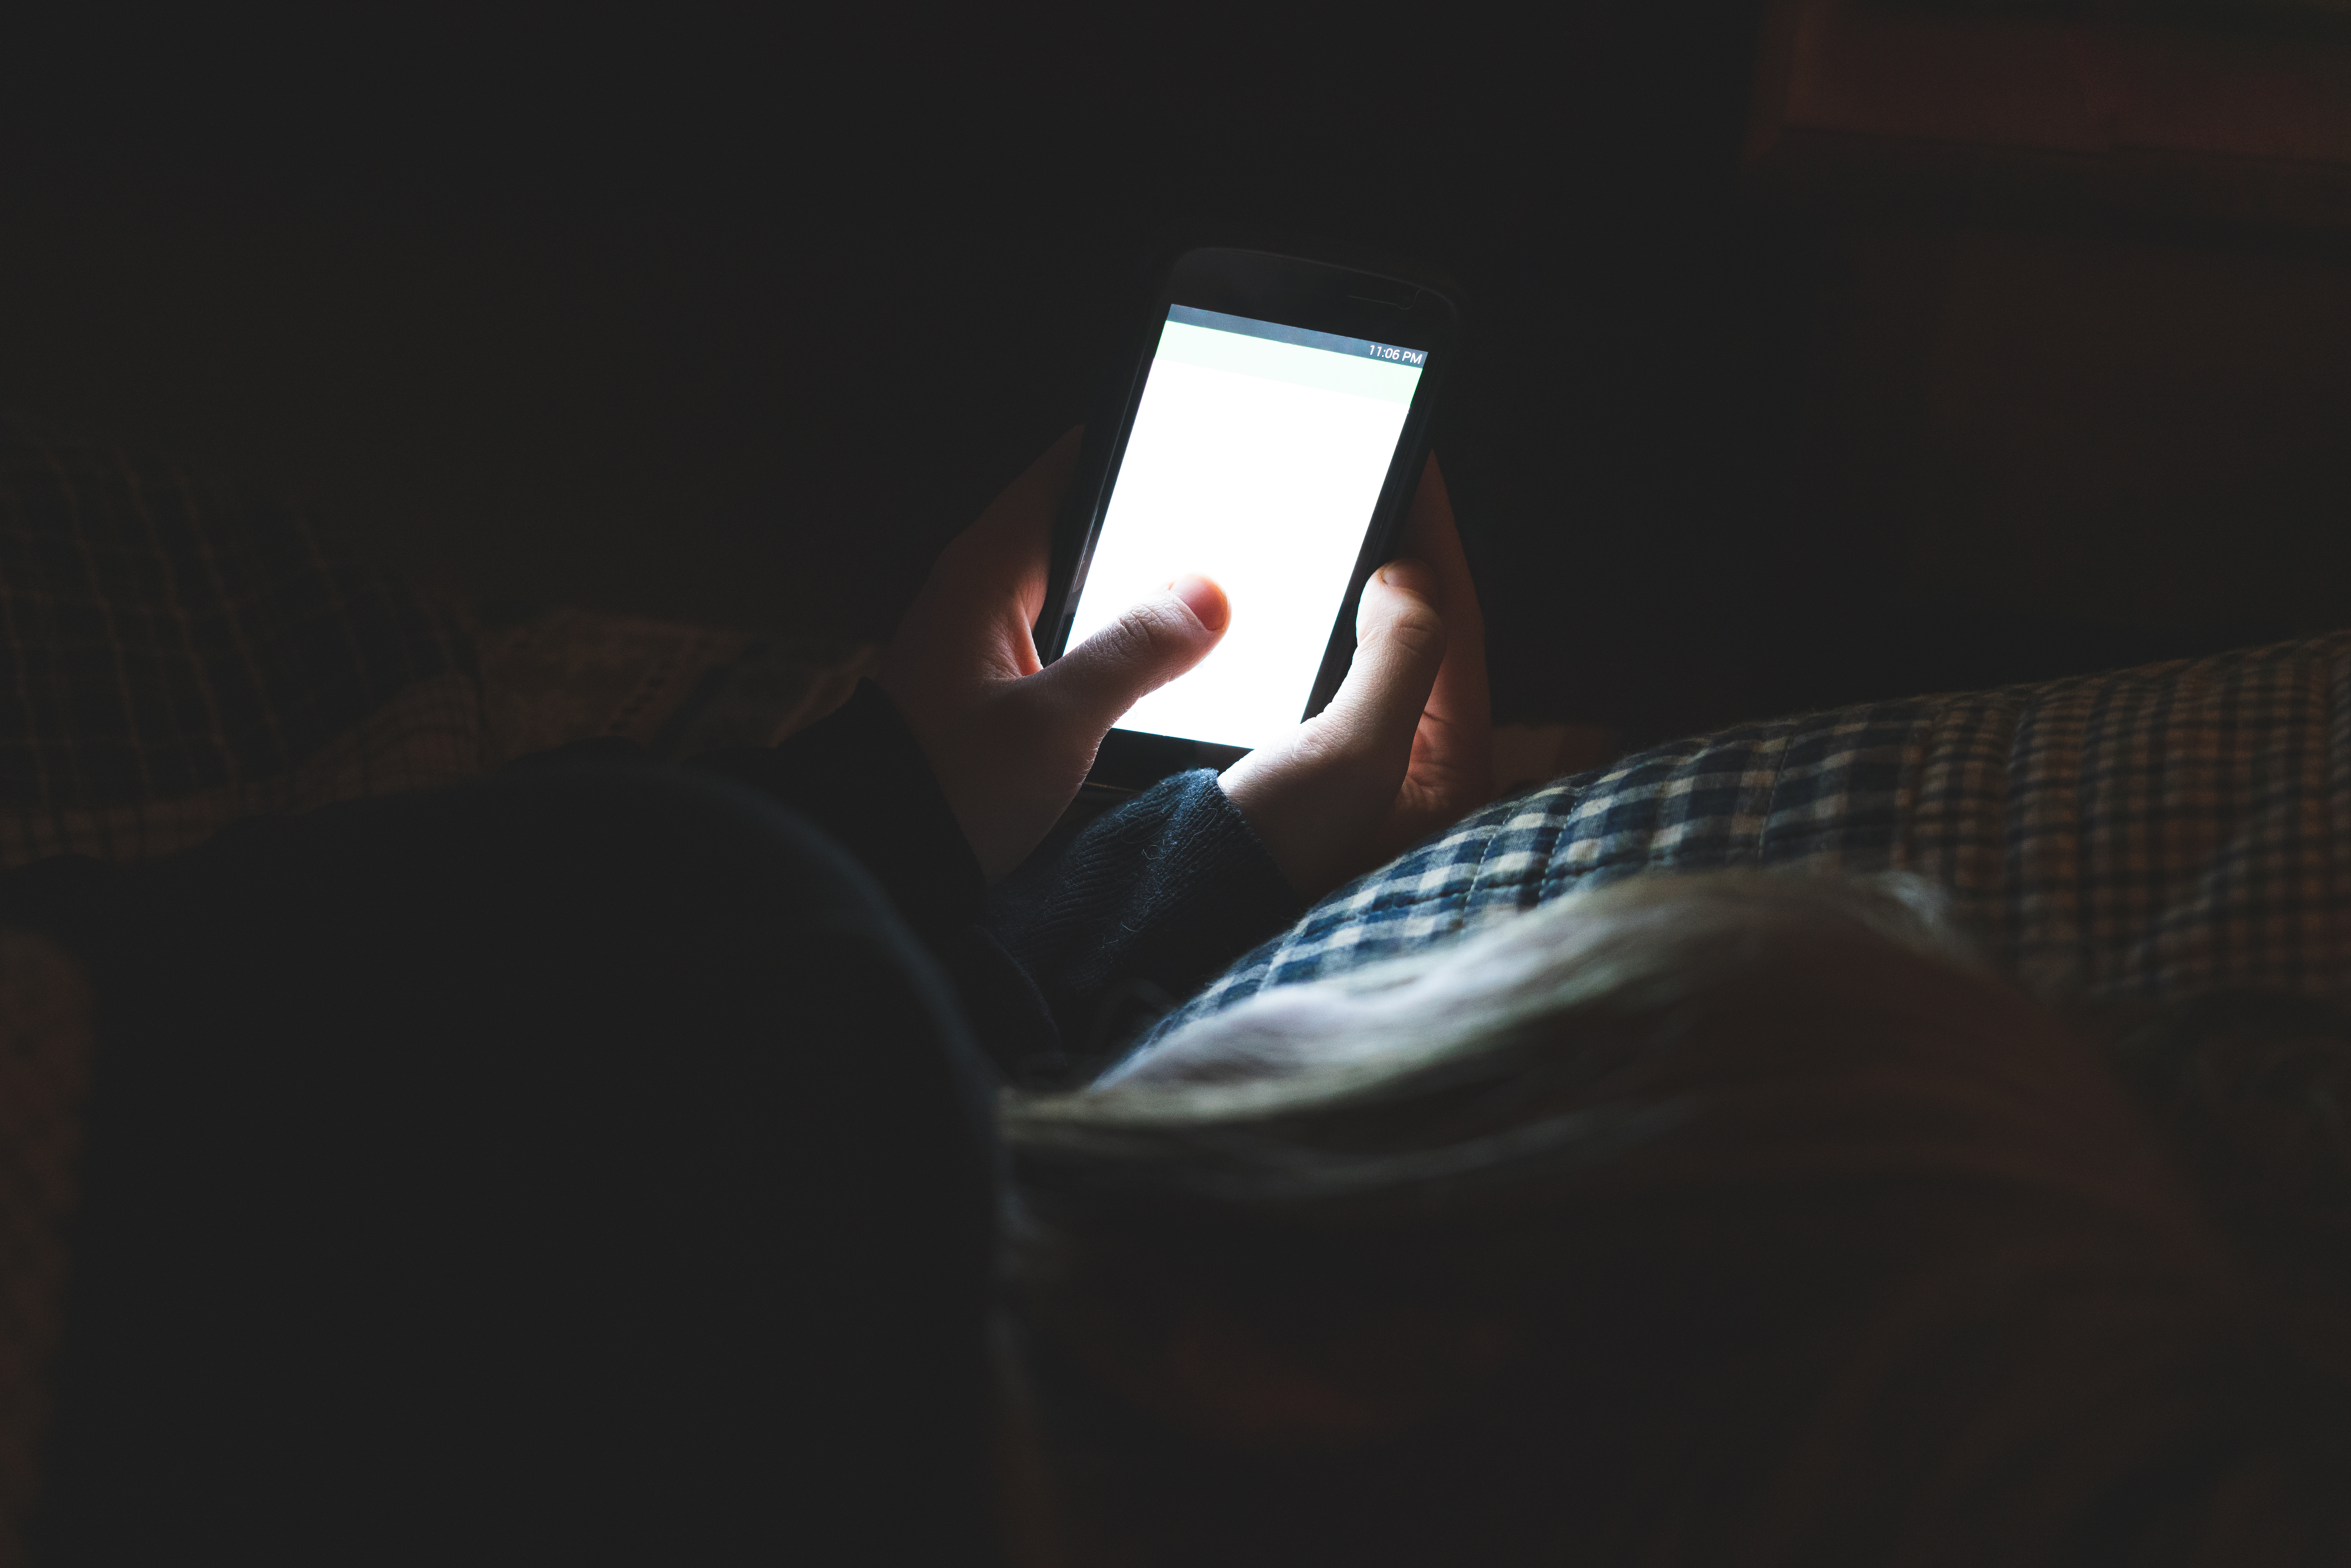 A person using a smart phone in the dark | Source: Pexels